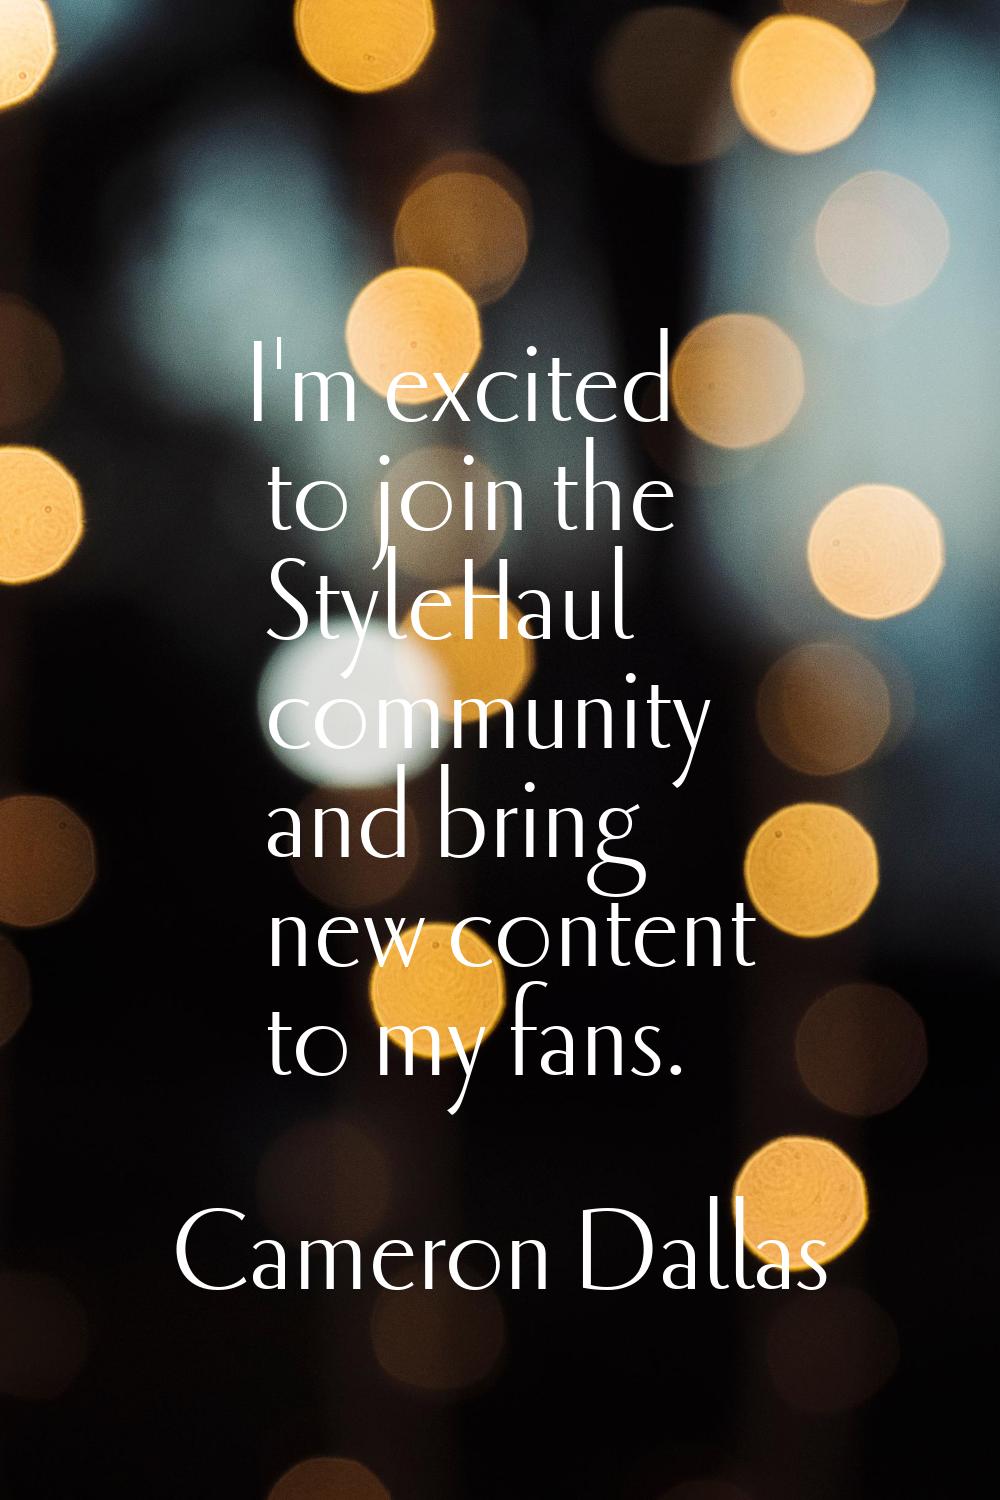 I'm excited to join the StyleHaul community and bring new content to my fans.